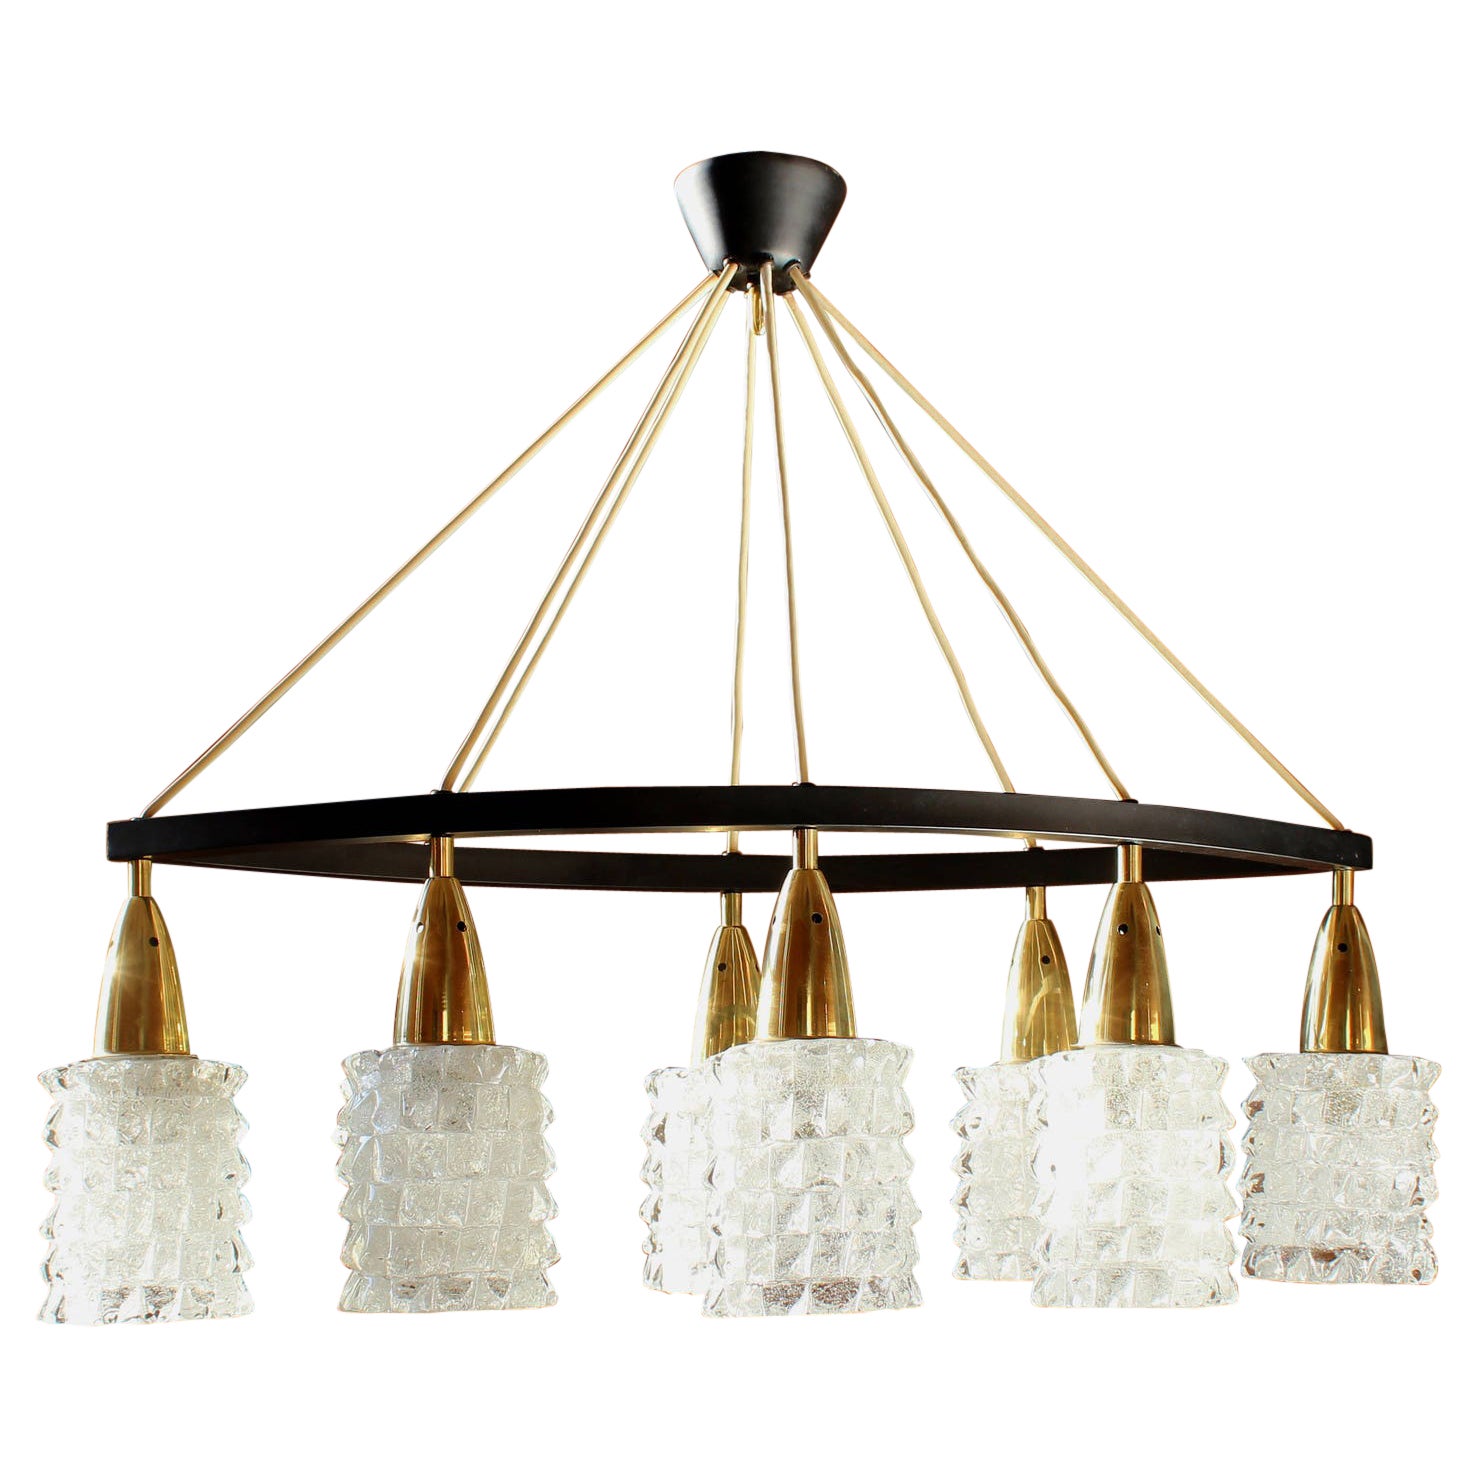 Barovier & Toso Rostrato Chandelier, Italy, 1970s For Sale